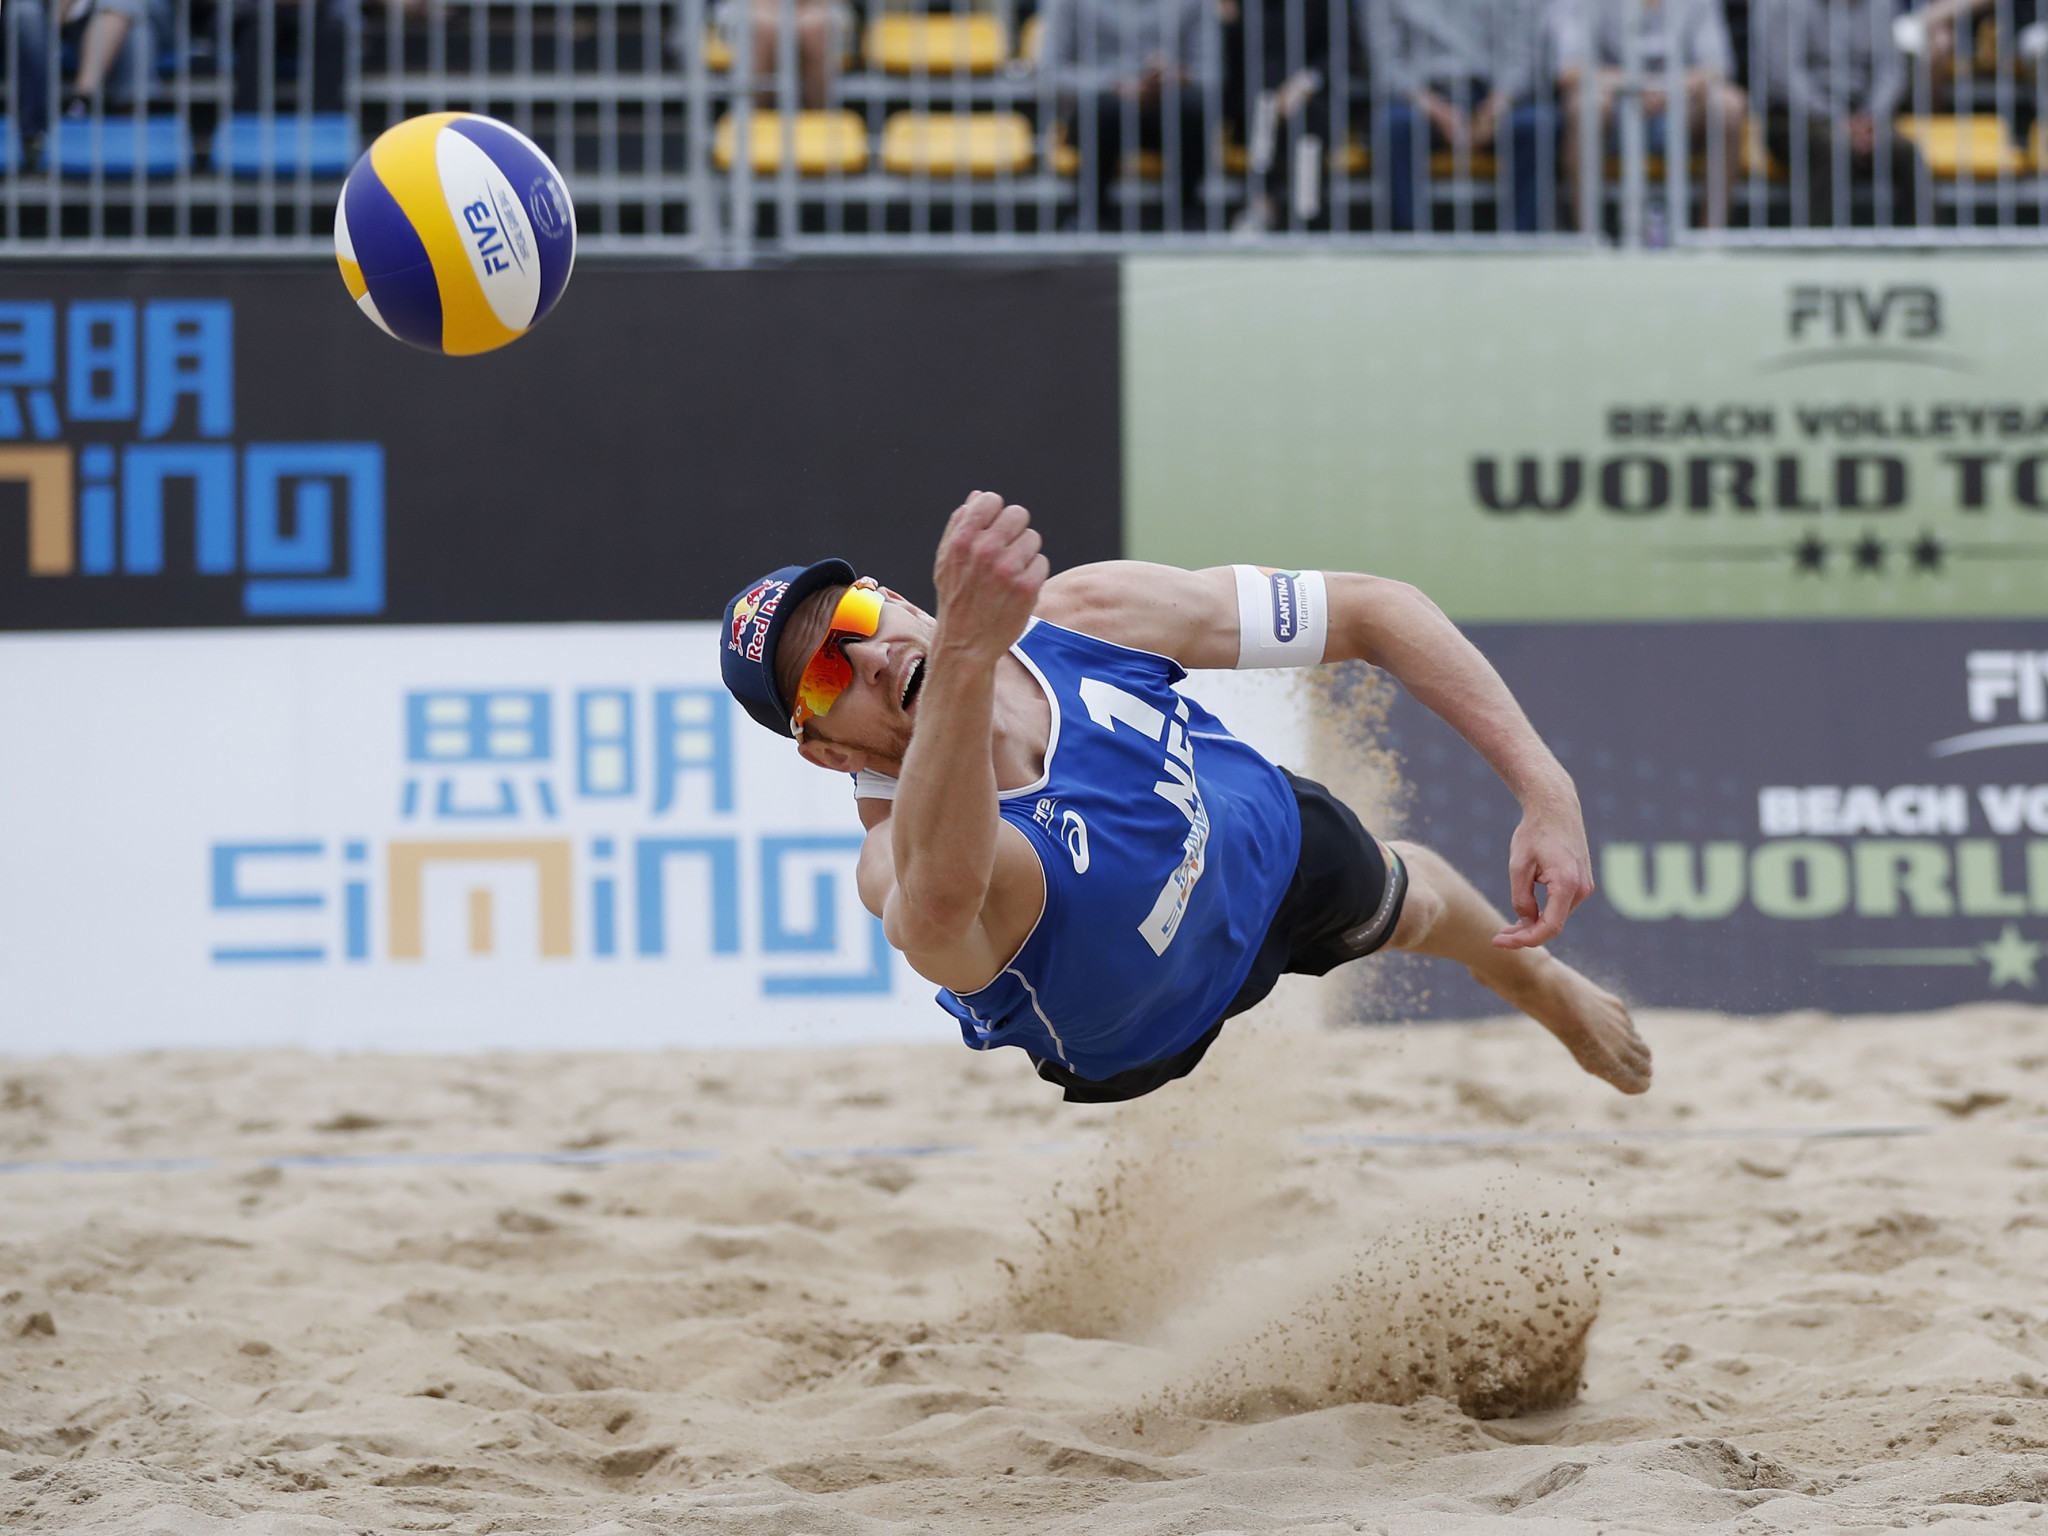 Alexander Brouwer, pictured, and partner Robert Meeuwsen are the favourites to win gold in The Hague ©Getty Images